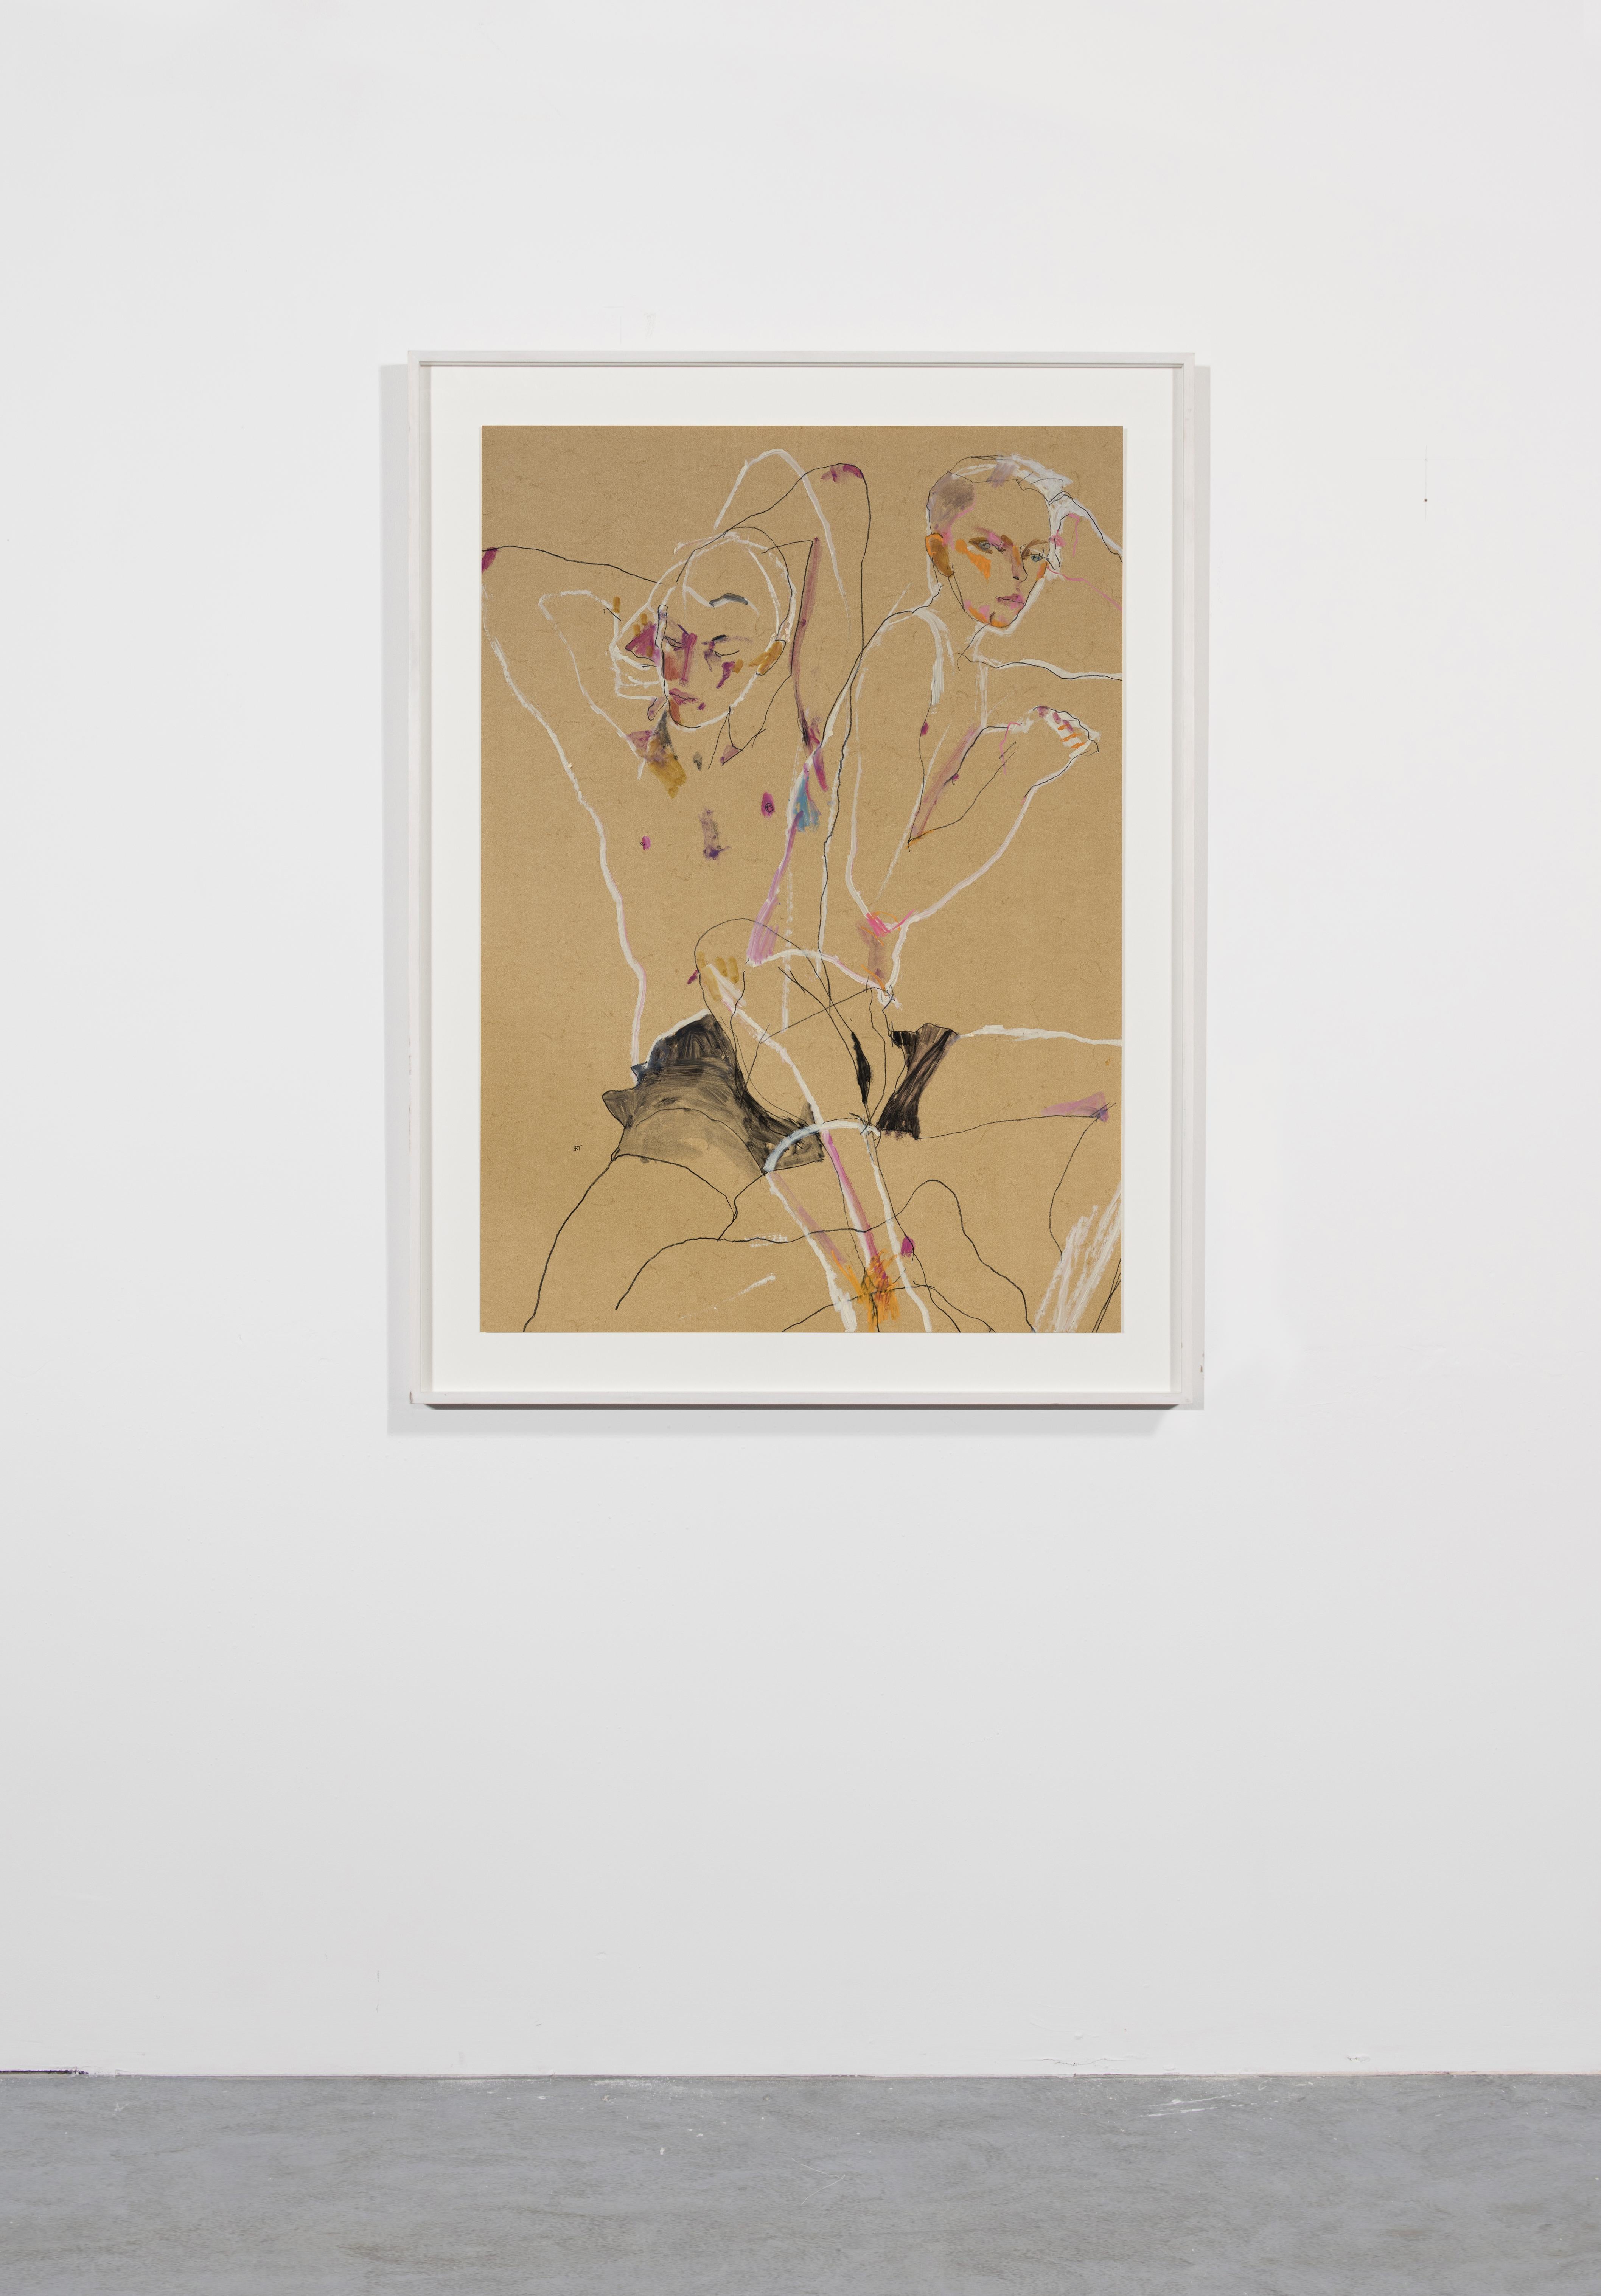 Matthew (Two Figures, Overlapping), Mixed media on ochre parchment - Contemporary Painting by Howard Tangye